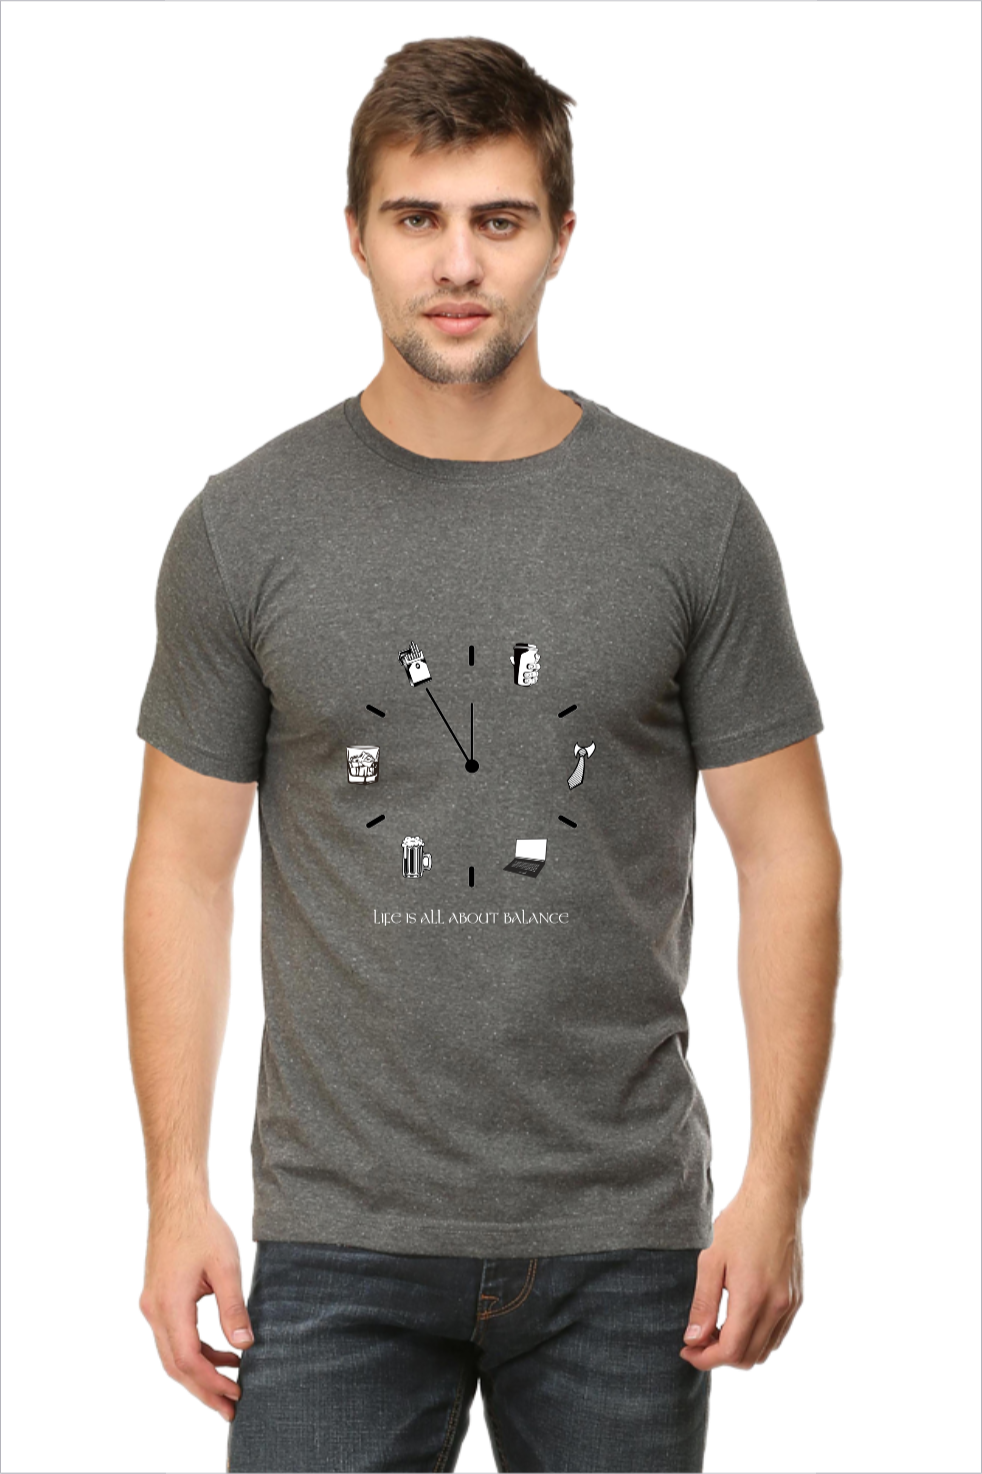 Men's All About Balance Charcoal-Grey Half Sleeve T-Shirt